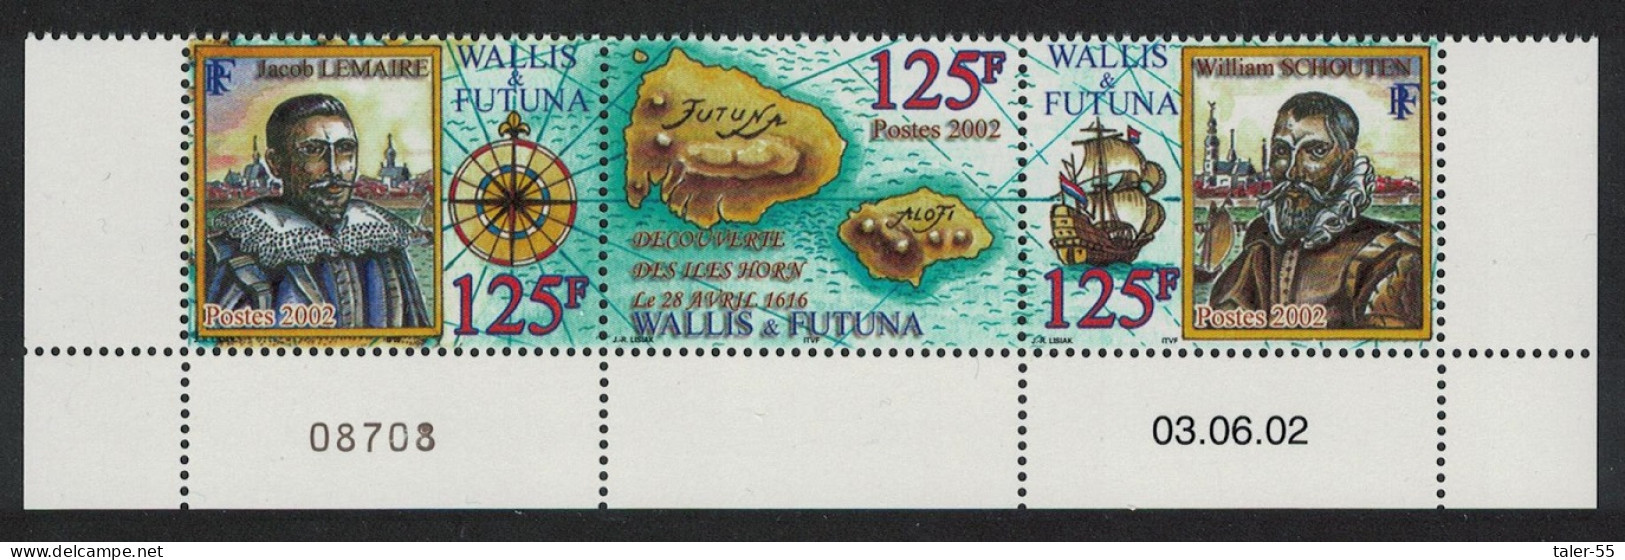 Wallis And Futuna Discovery Of Futuna Strip Of 3v Date Control Number 2002 MNH SG#804-806 Sc#558 - Unused Stamps